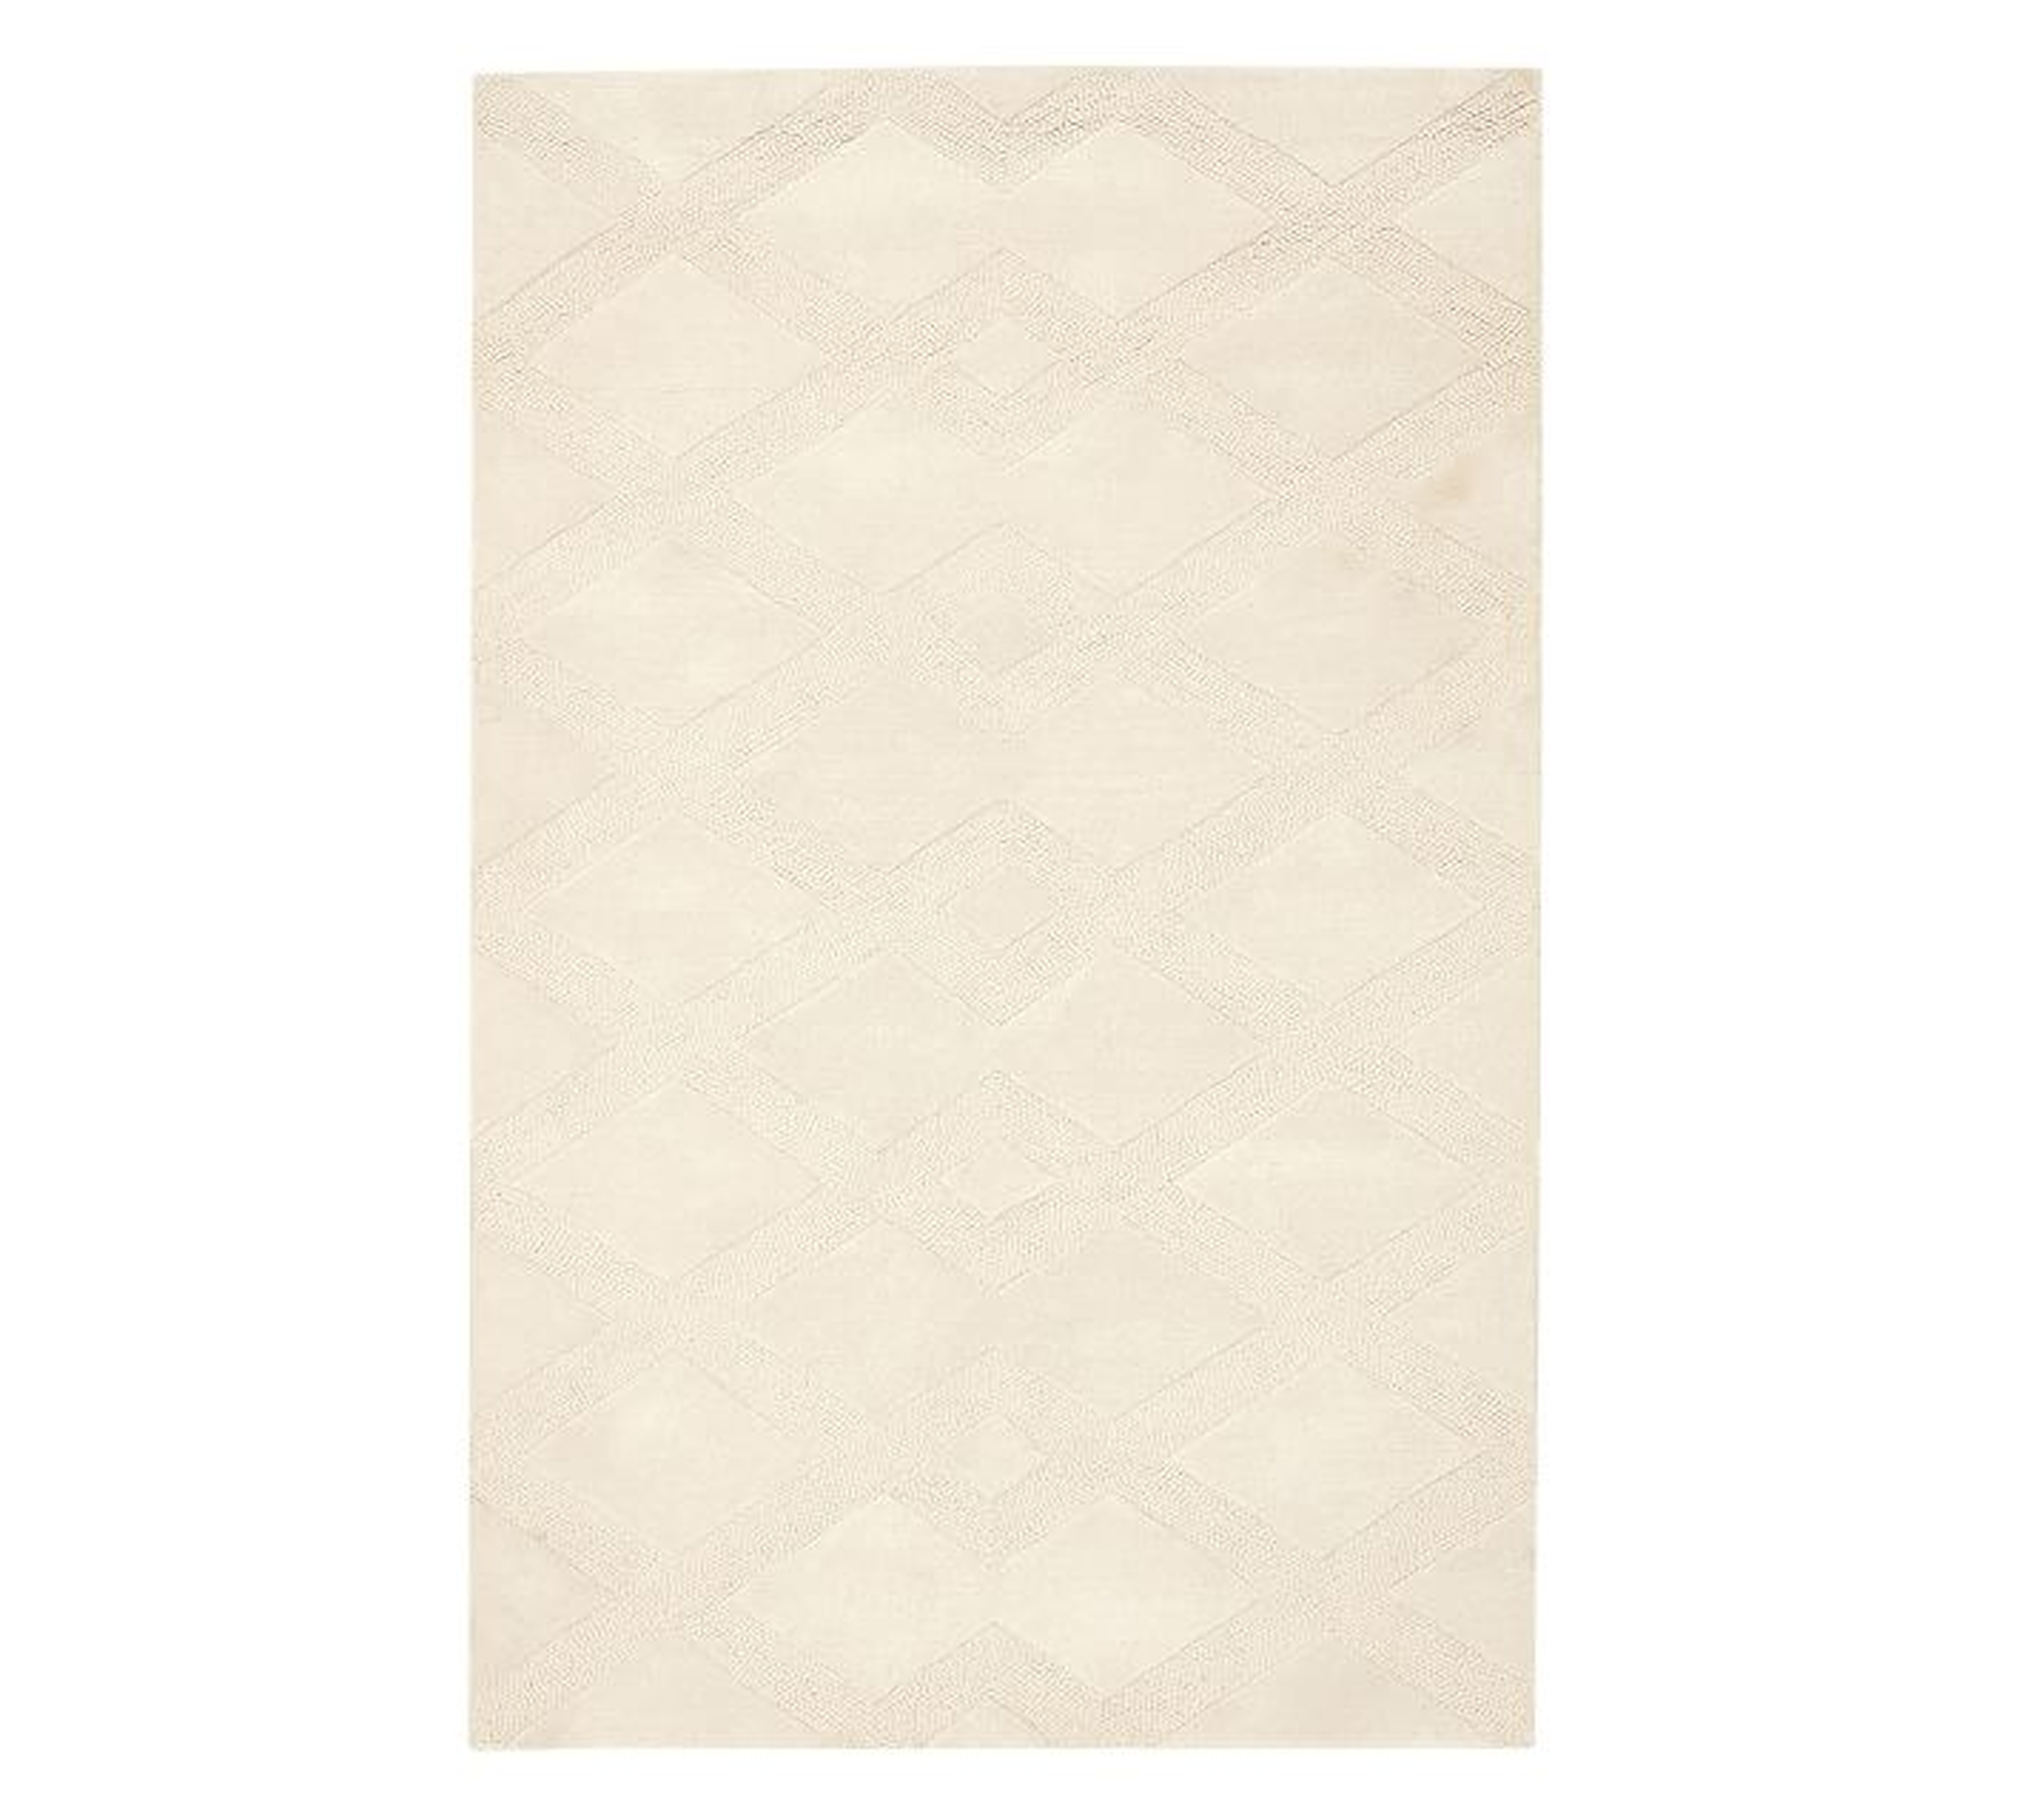 Chase Tufted Rug, 8x10', Ivory - Pottery Barn